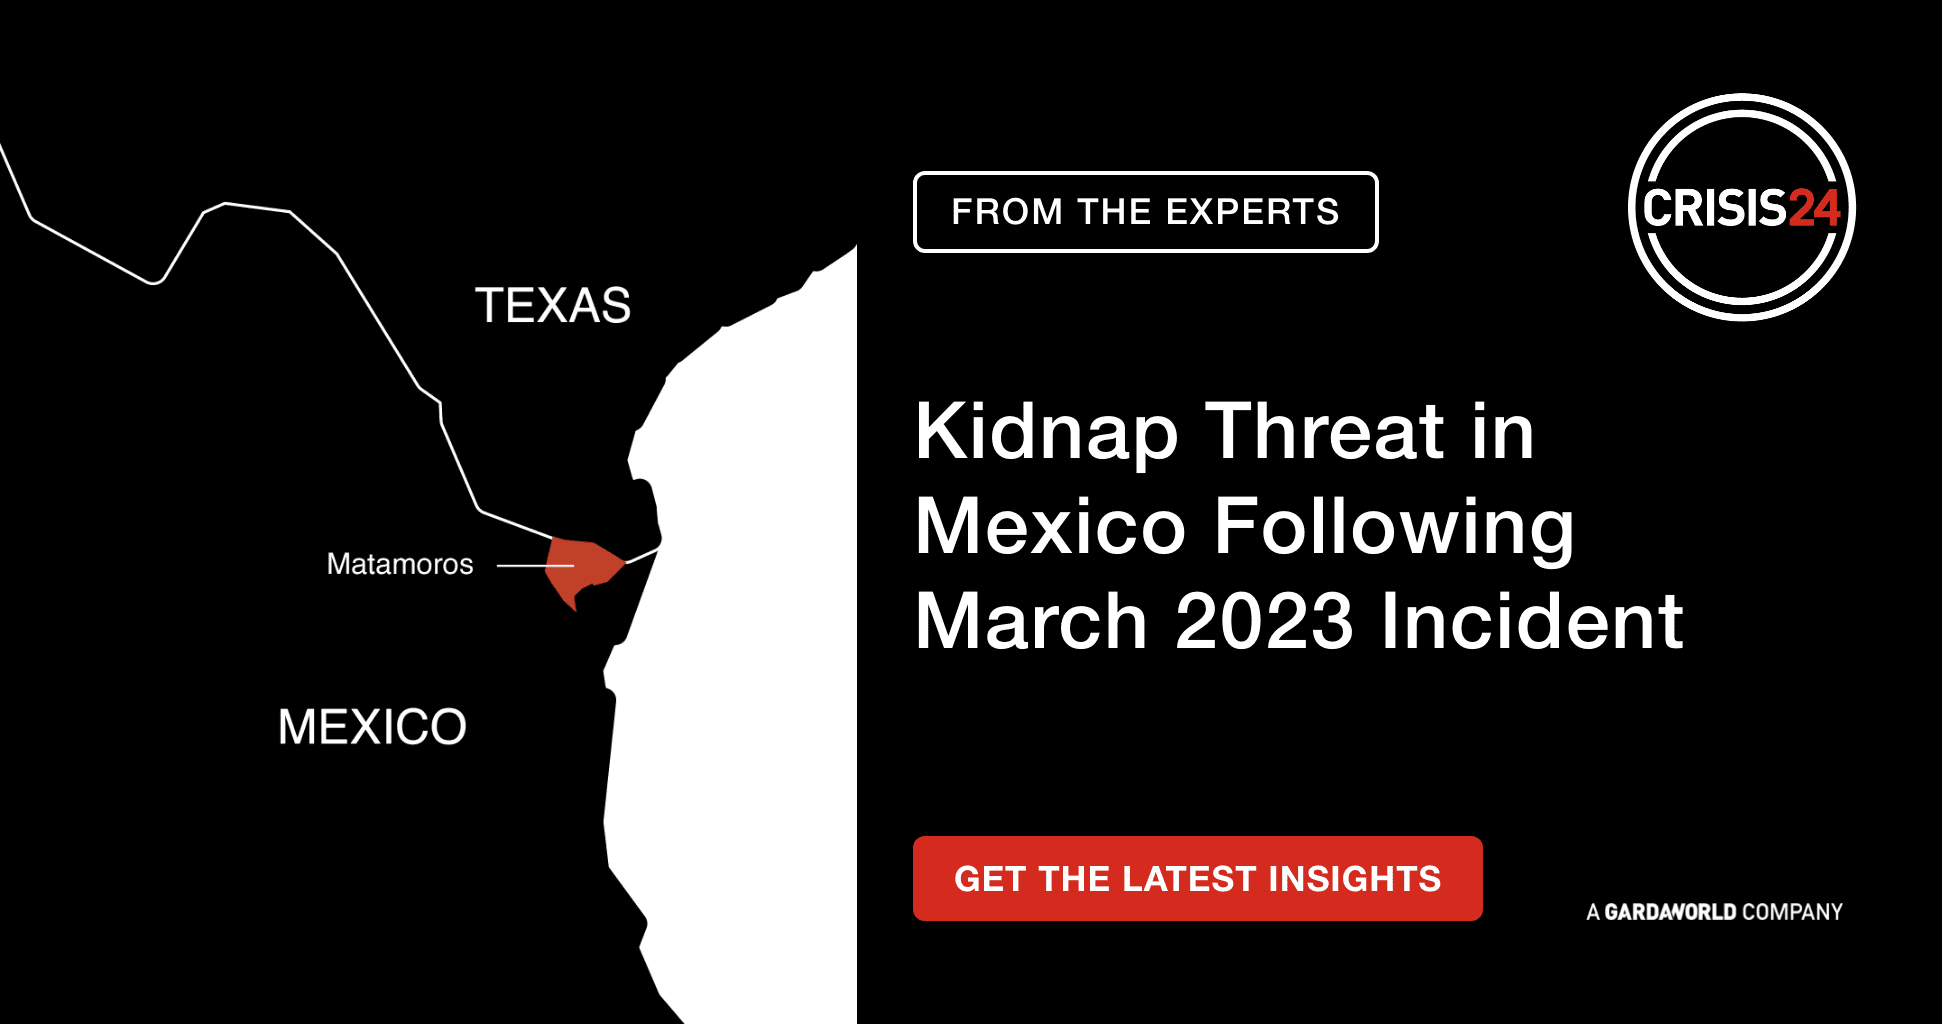 FROM THE EXPERTS: Kidnap Threat in Mexico Following March 2023 Incident